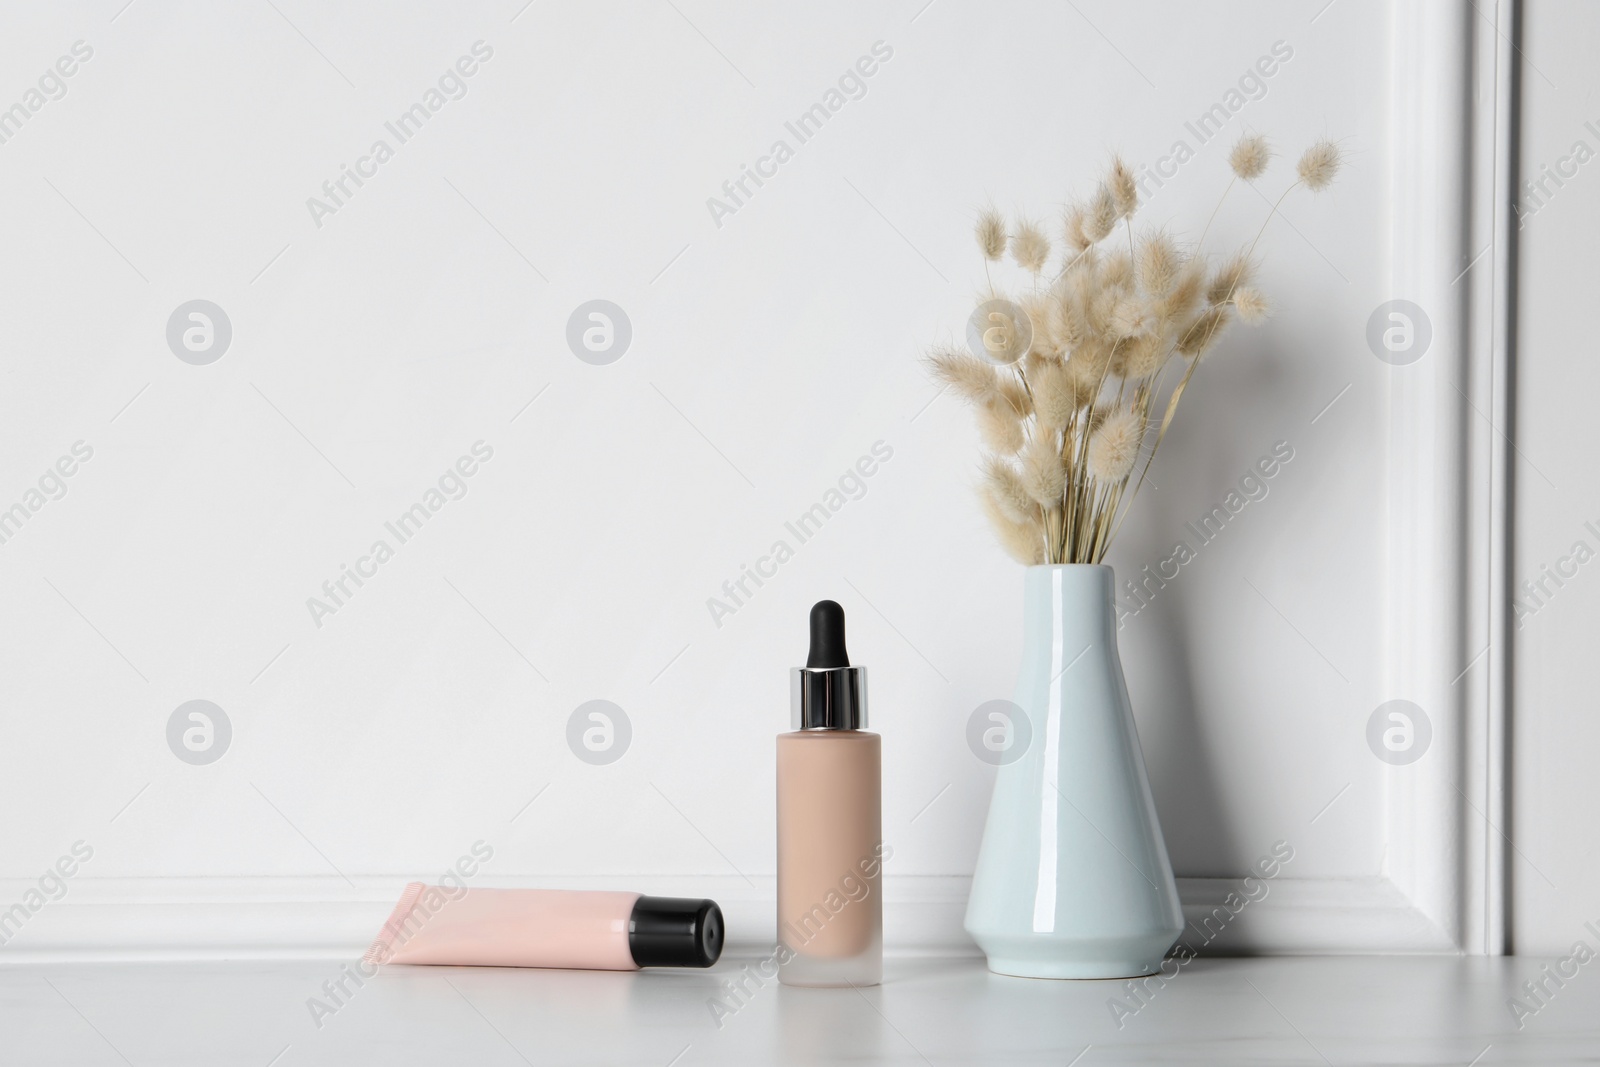 Photo of Skin foundation and dried reeds near white wall, space for text. Makeup product